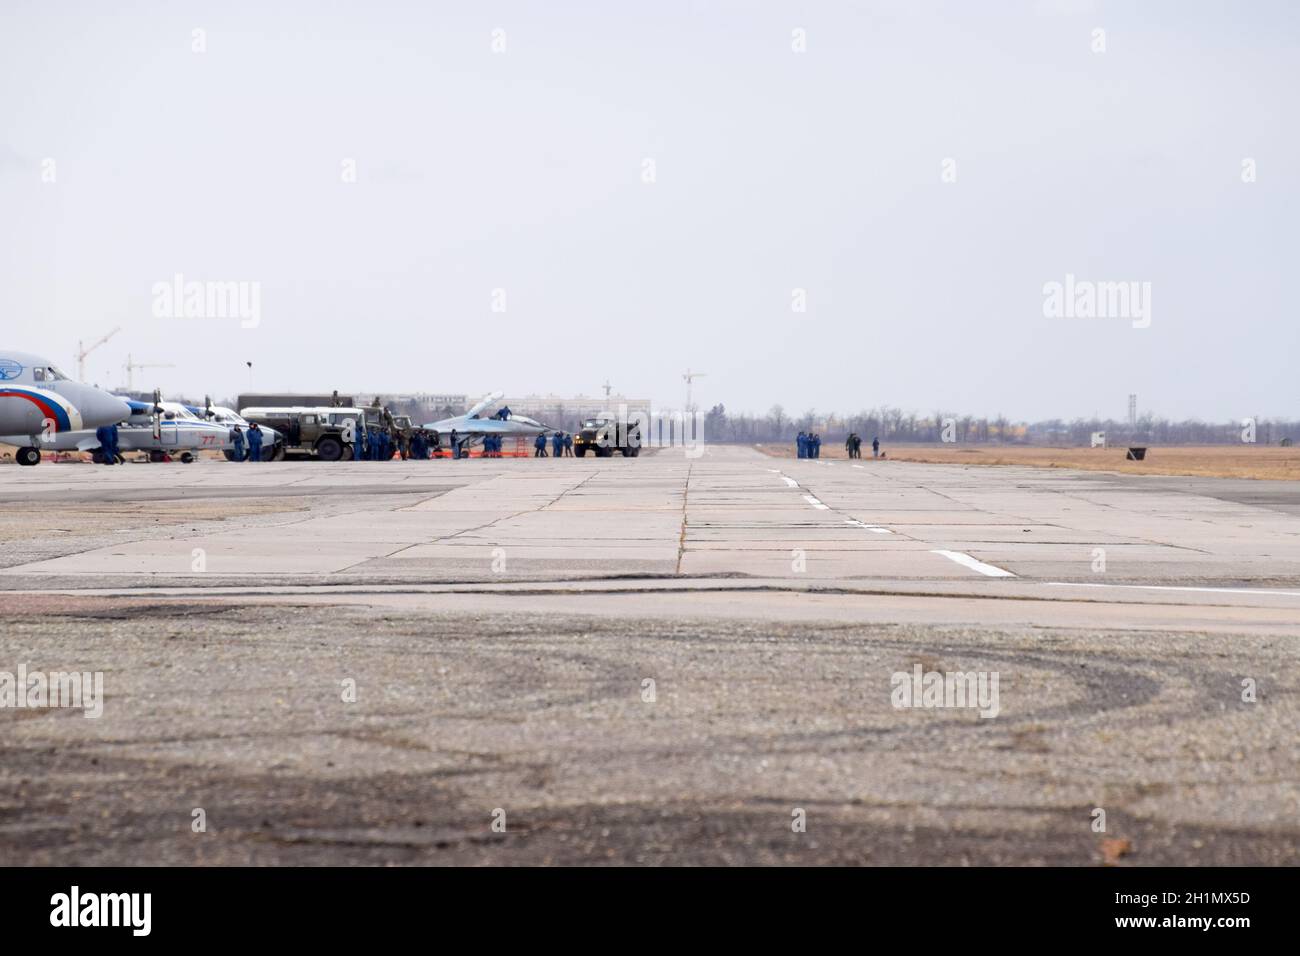 Krasnodar, Russia - February 23, 2017: Air show in honor of the Defender of the Fatherland. The runway for fighter aircraft. Stock Photo